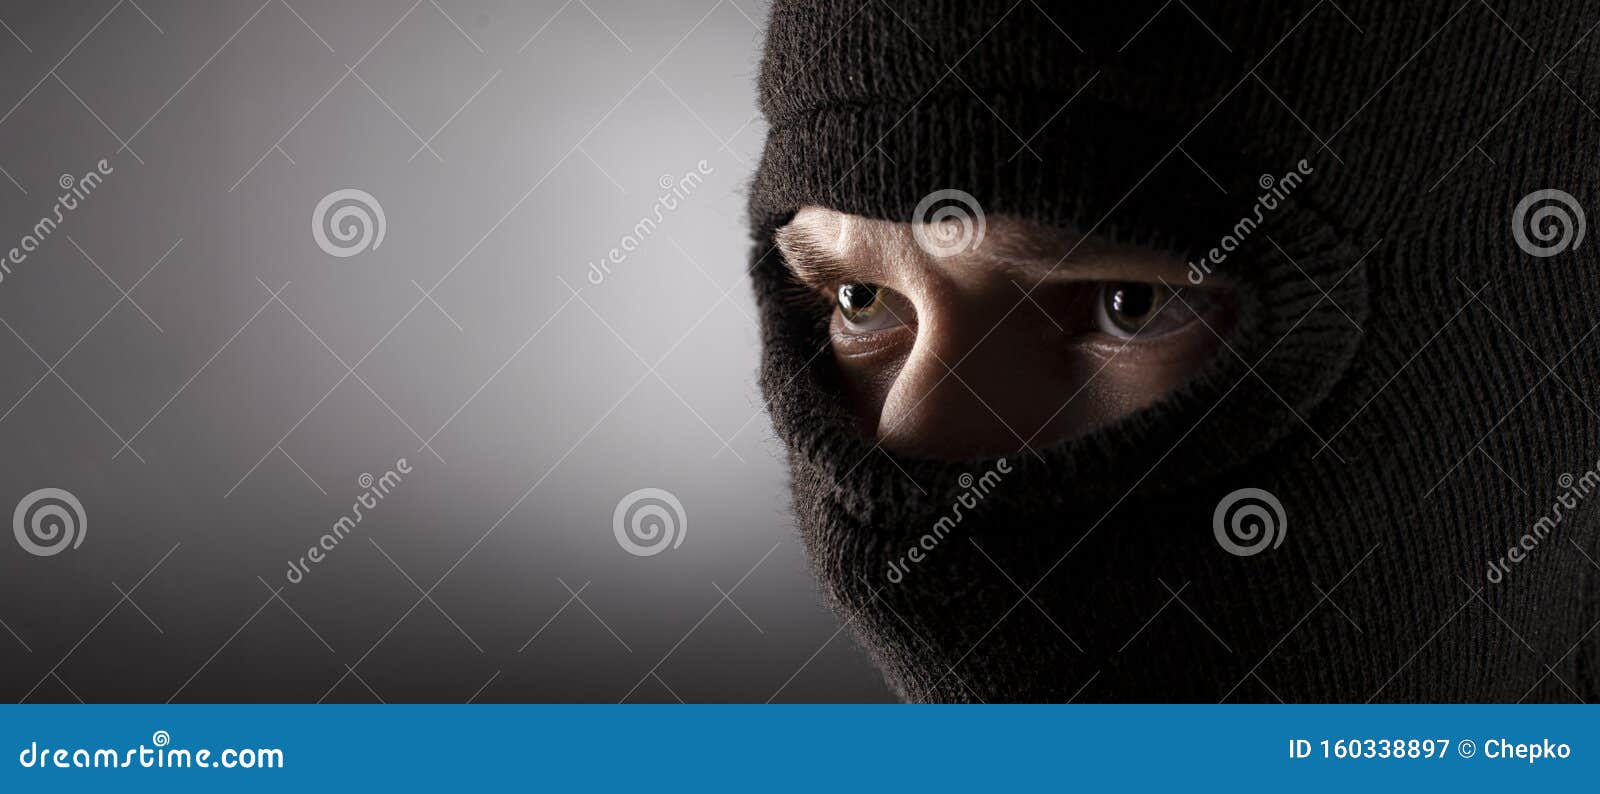 angry man in a balaclava on a dark background